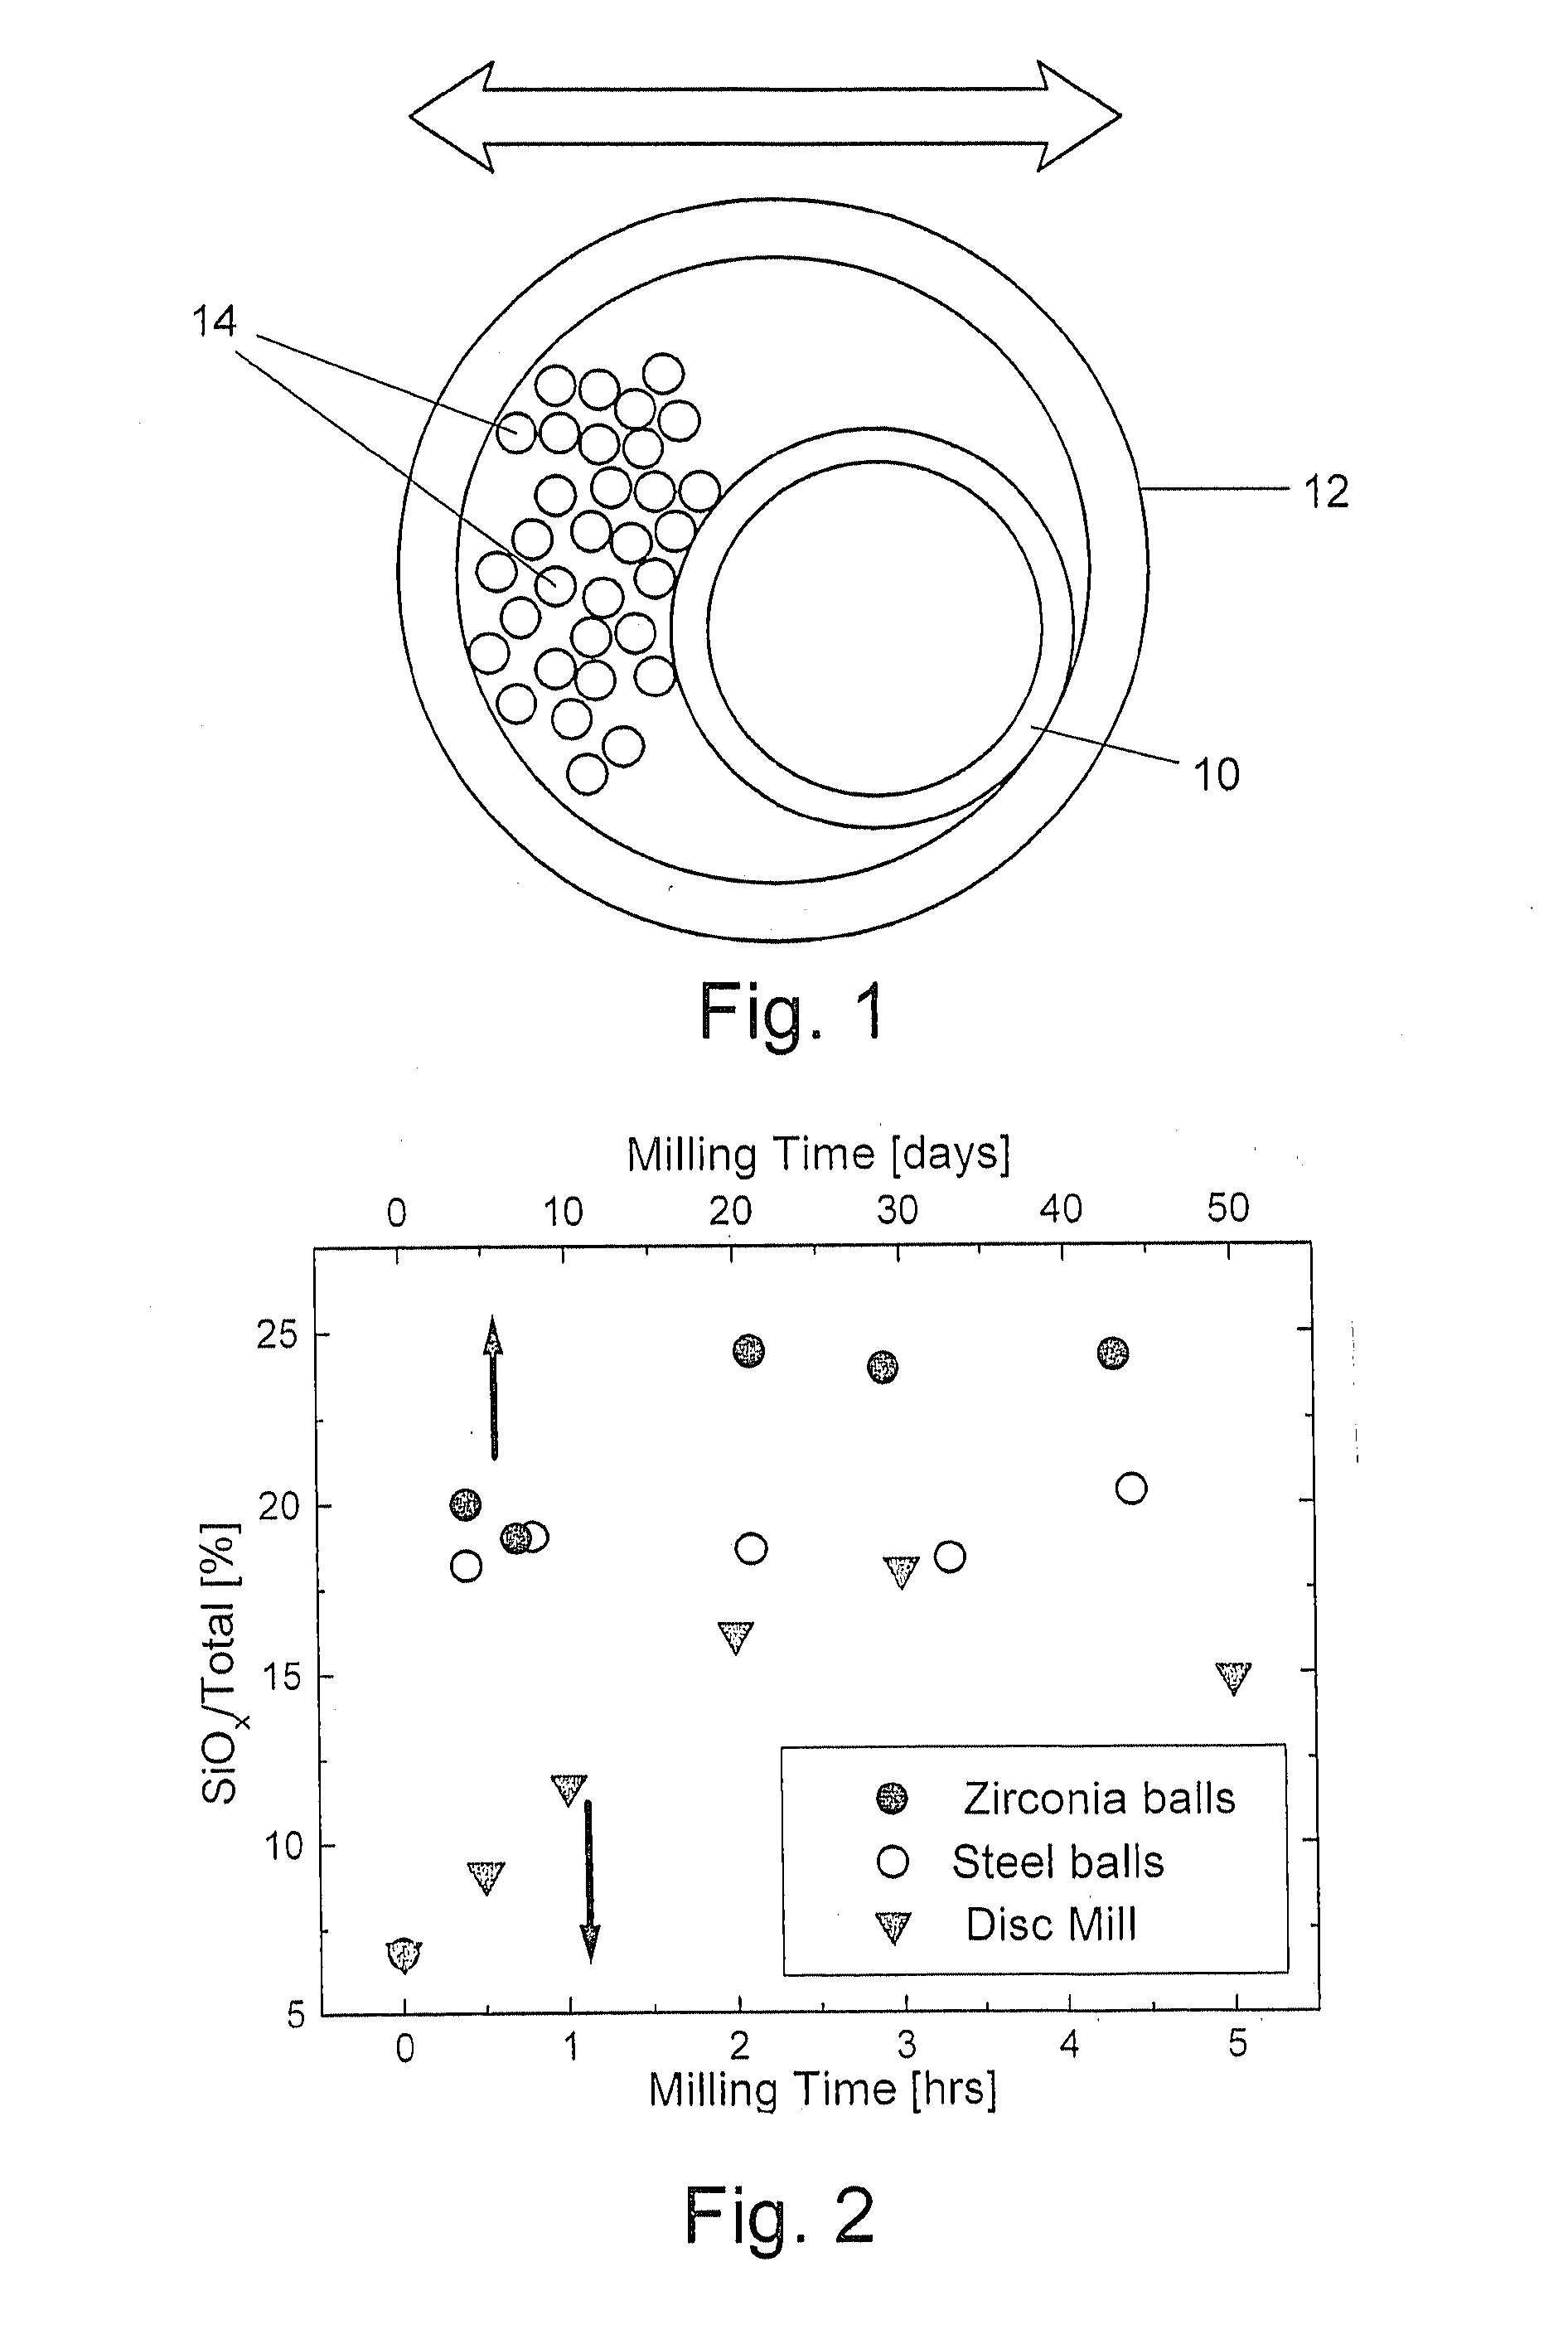 Method of Producing Stable Oxygen Terminated Semiconducting Nanoparticles